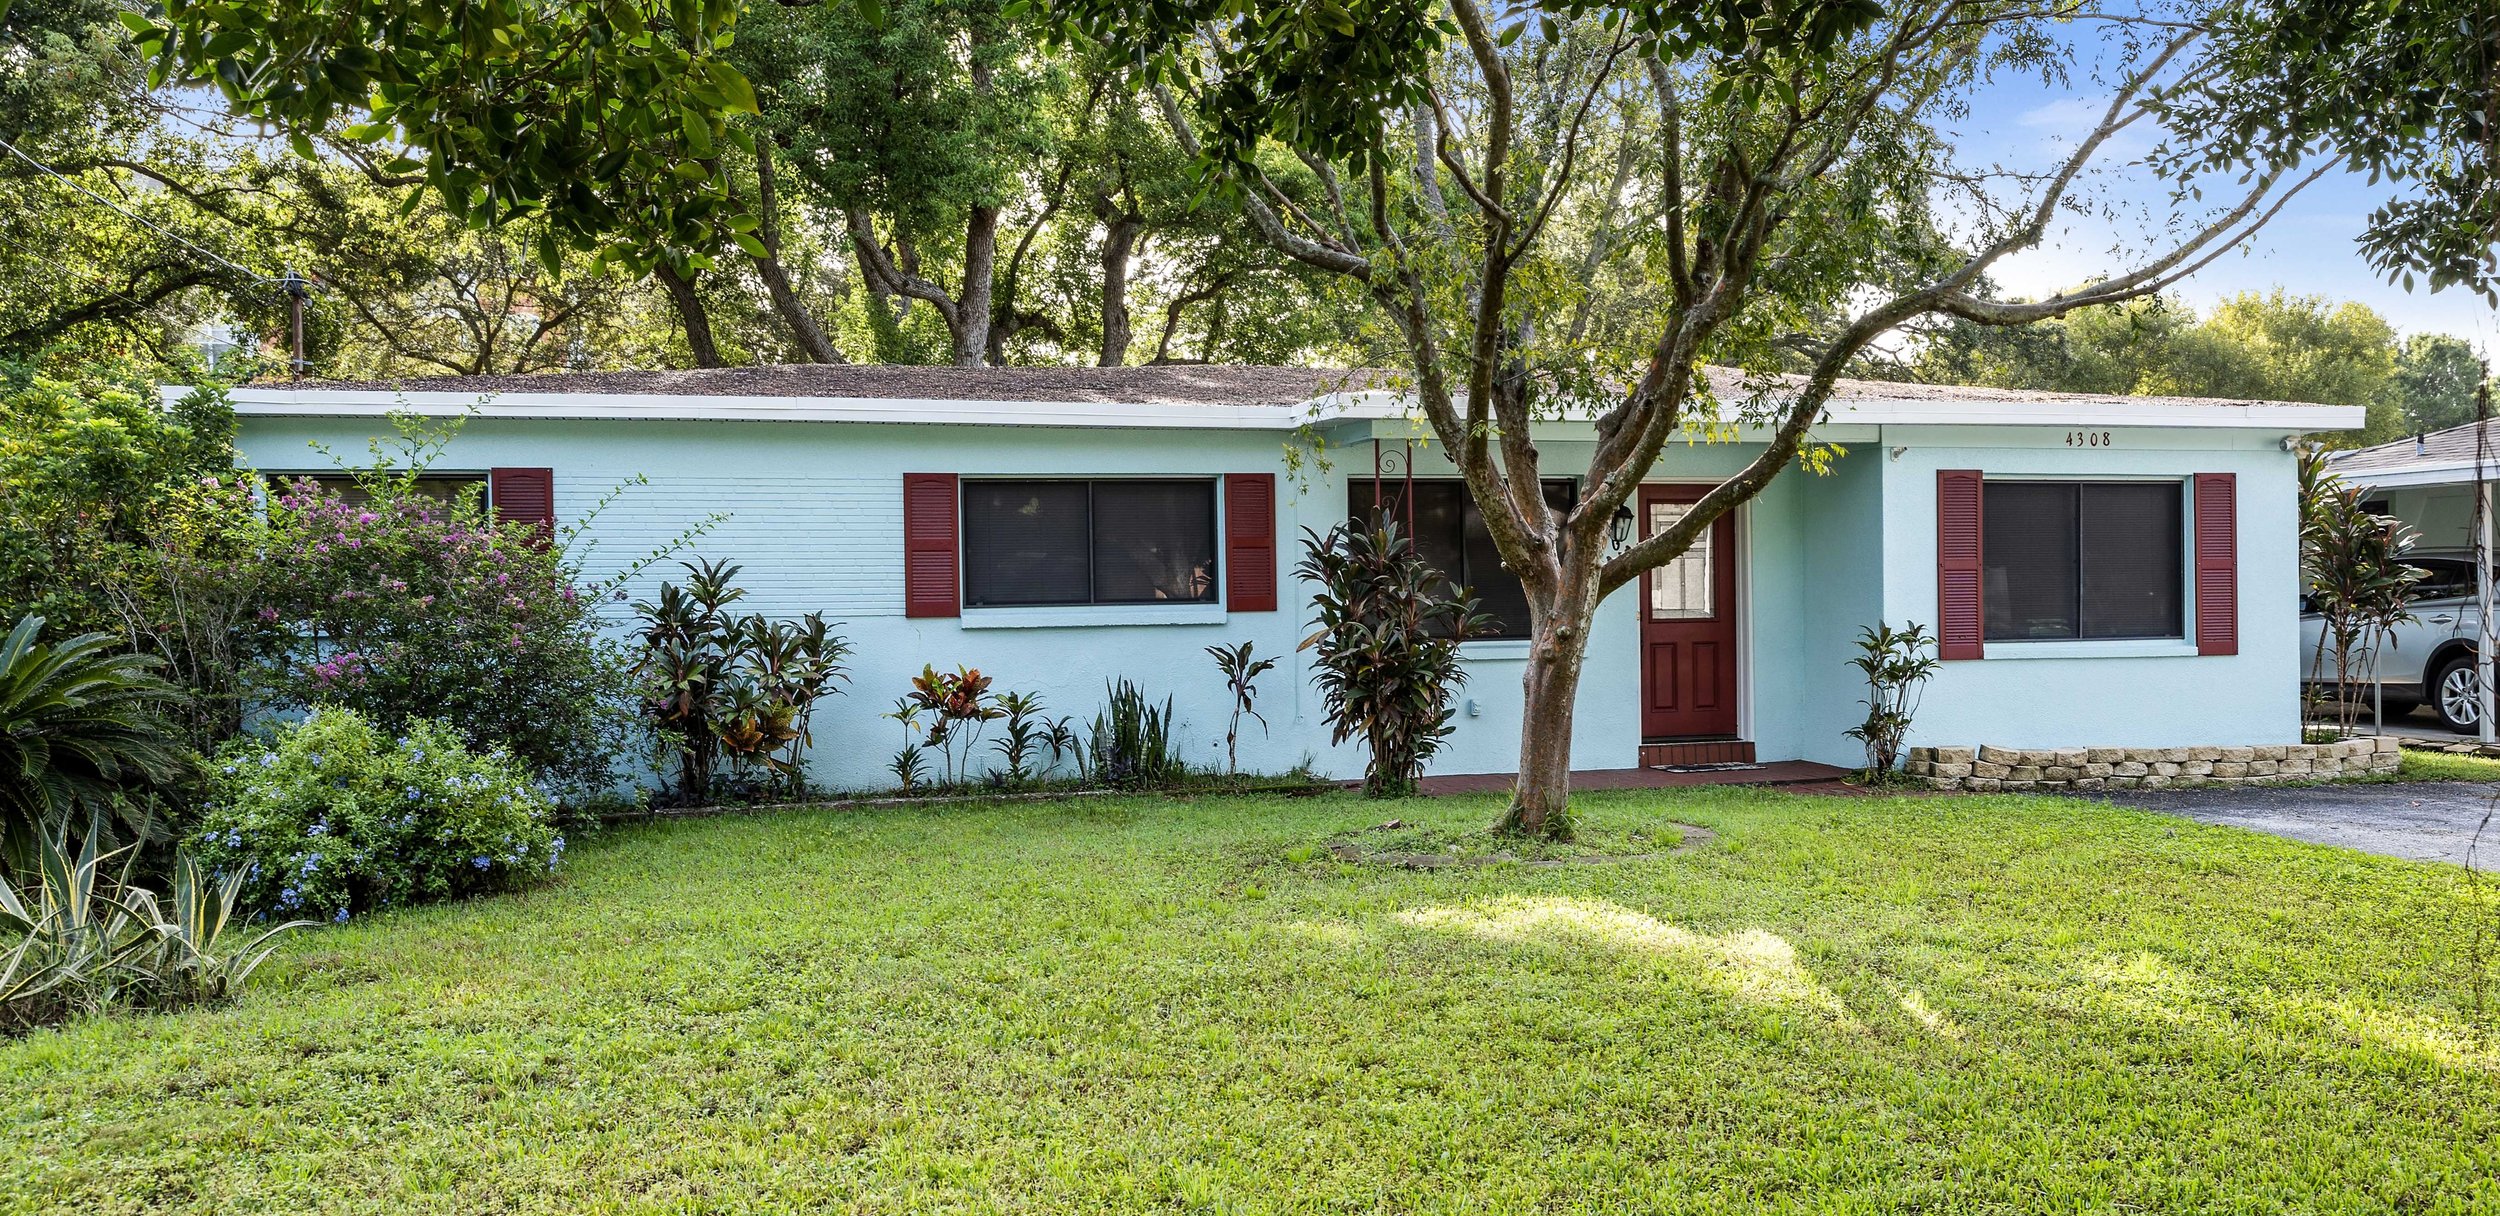 4308 S Grady Avenue - South Tampa - SOLD in January, 2021